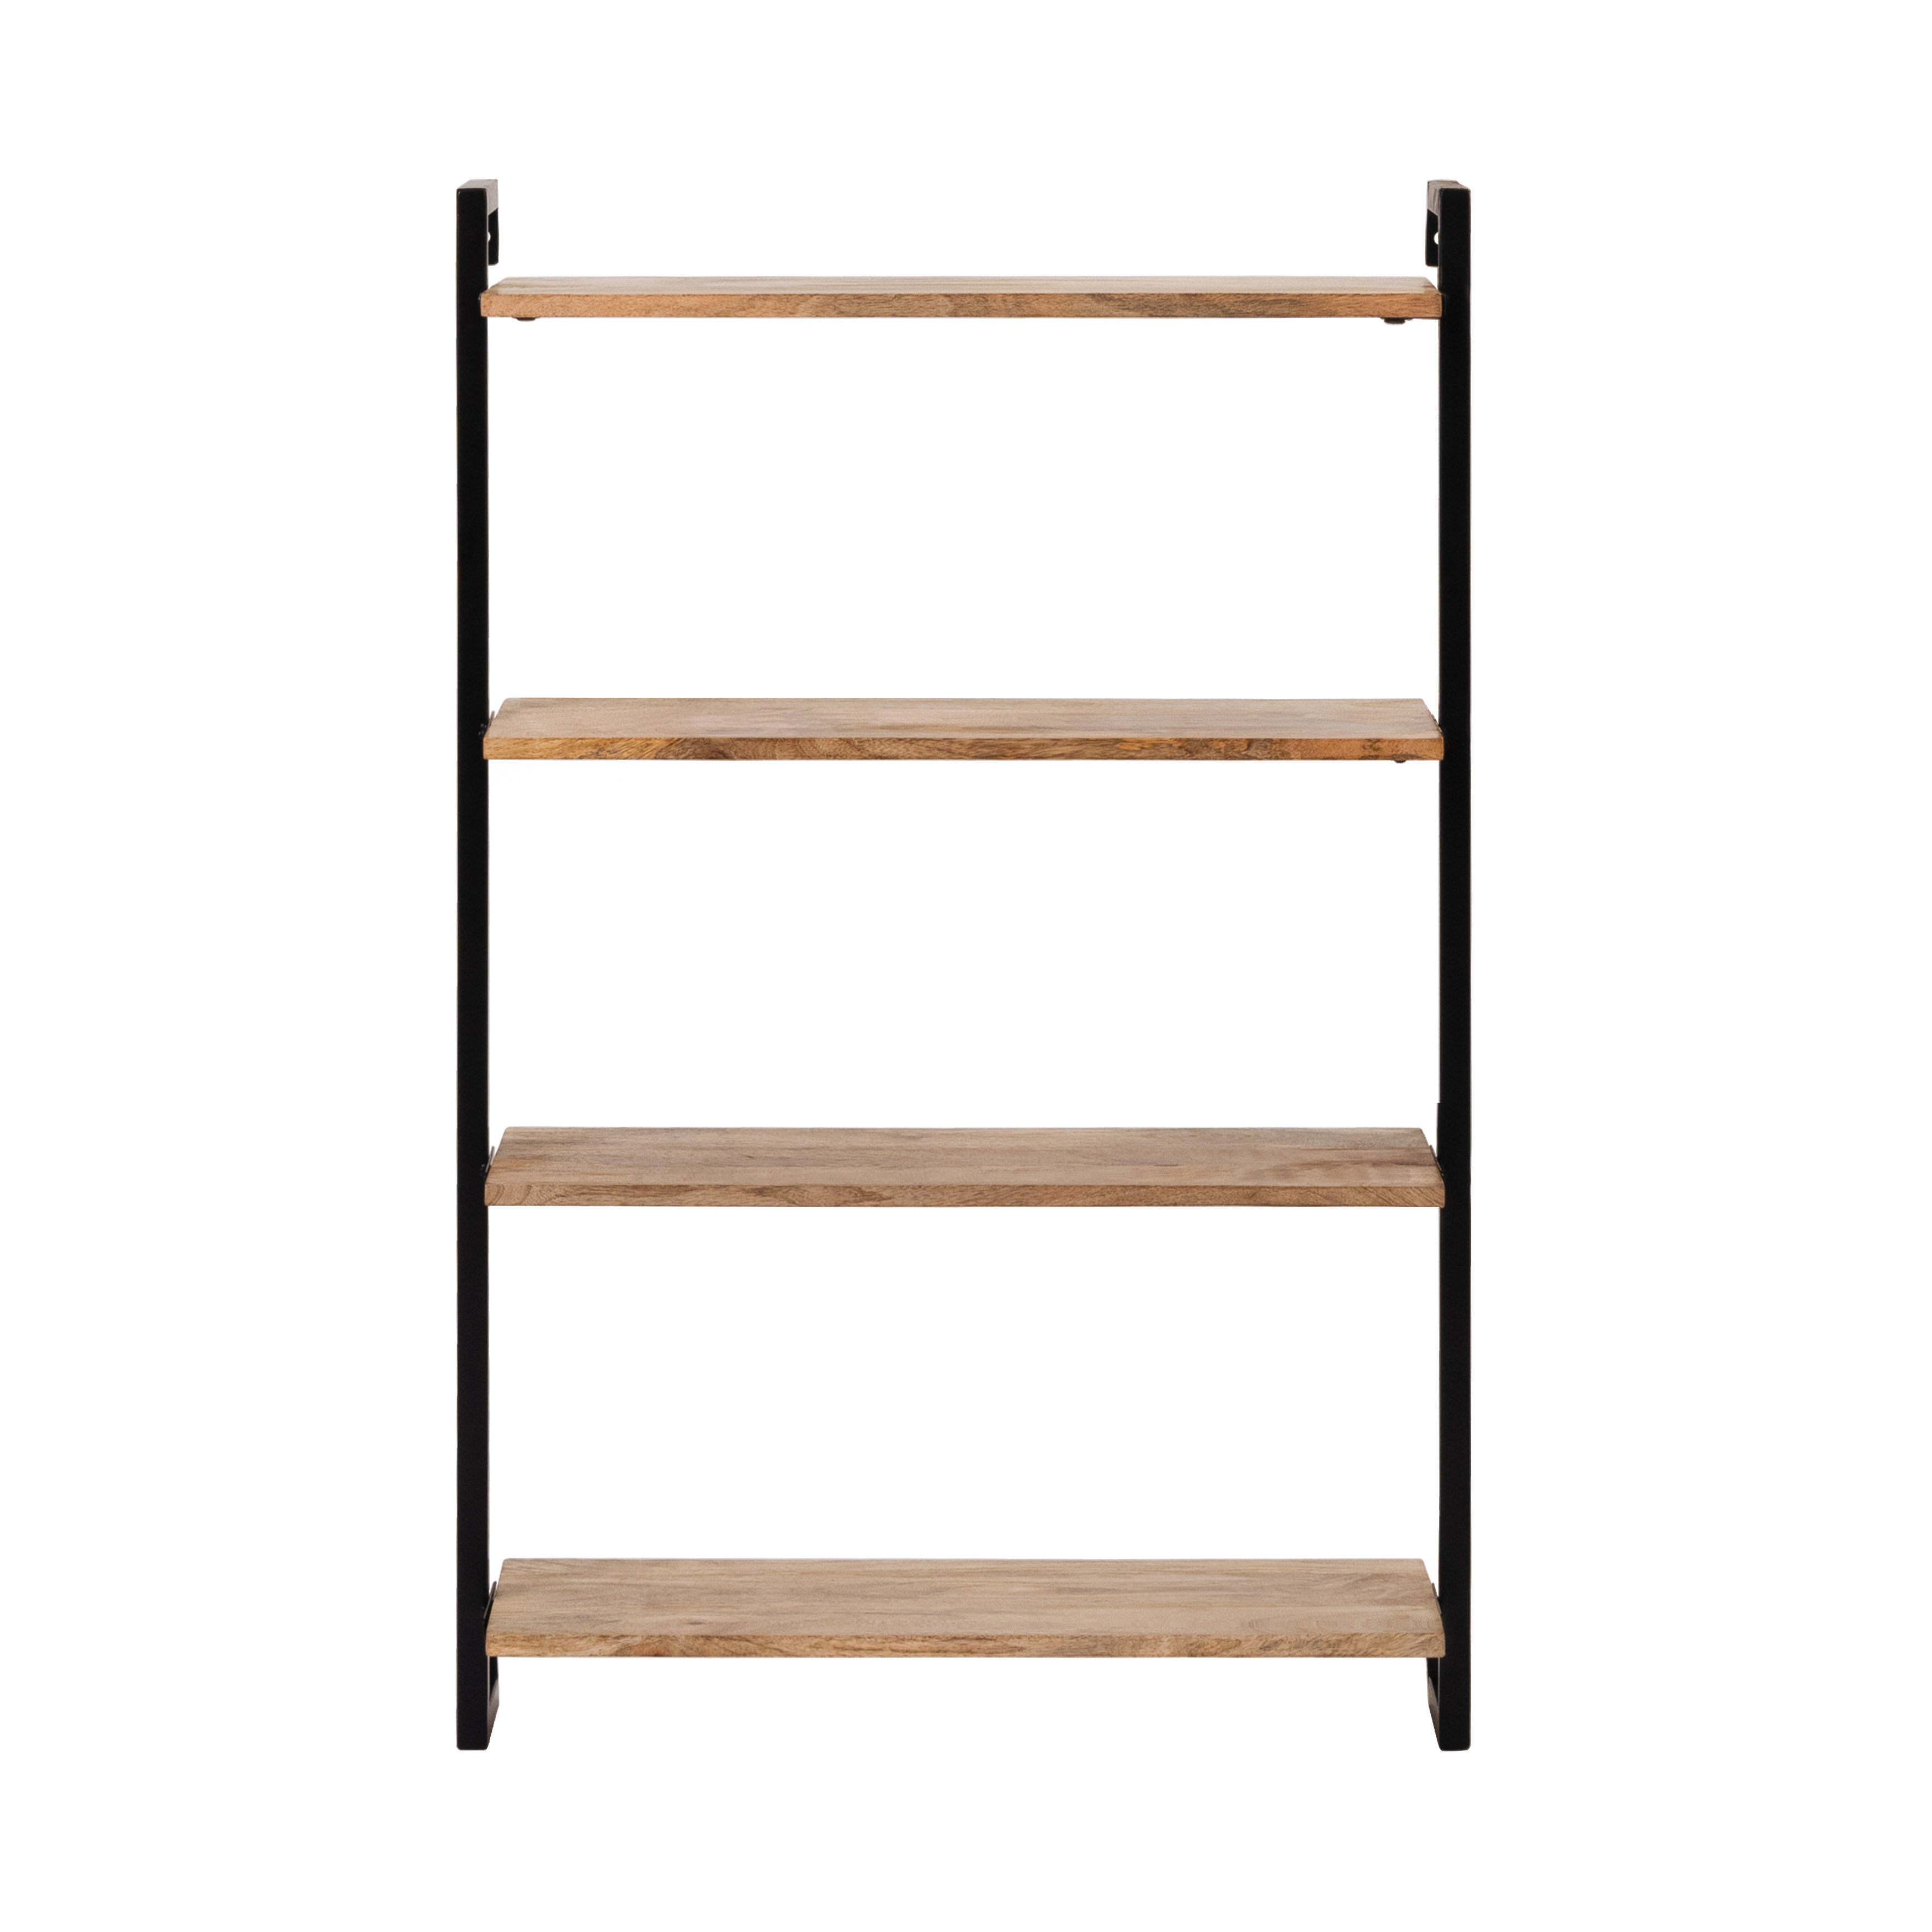 3 Piece Wood Tiered Shelf with Adjustable Shelves 17 Stories